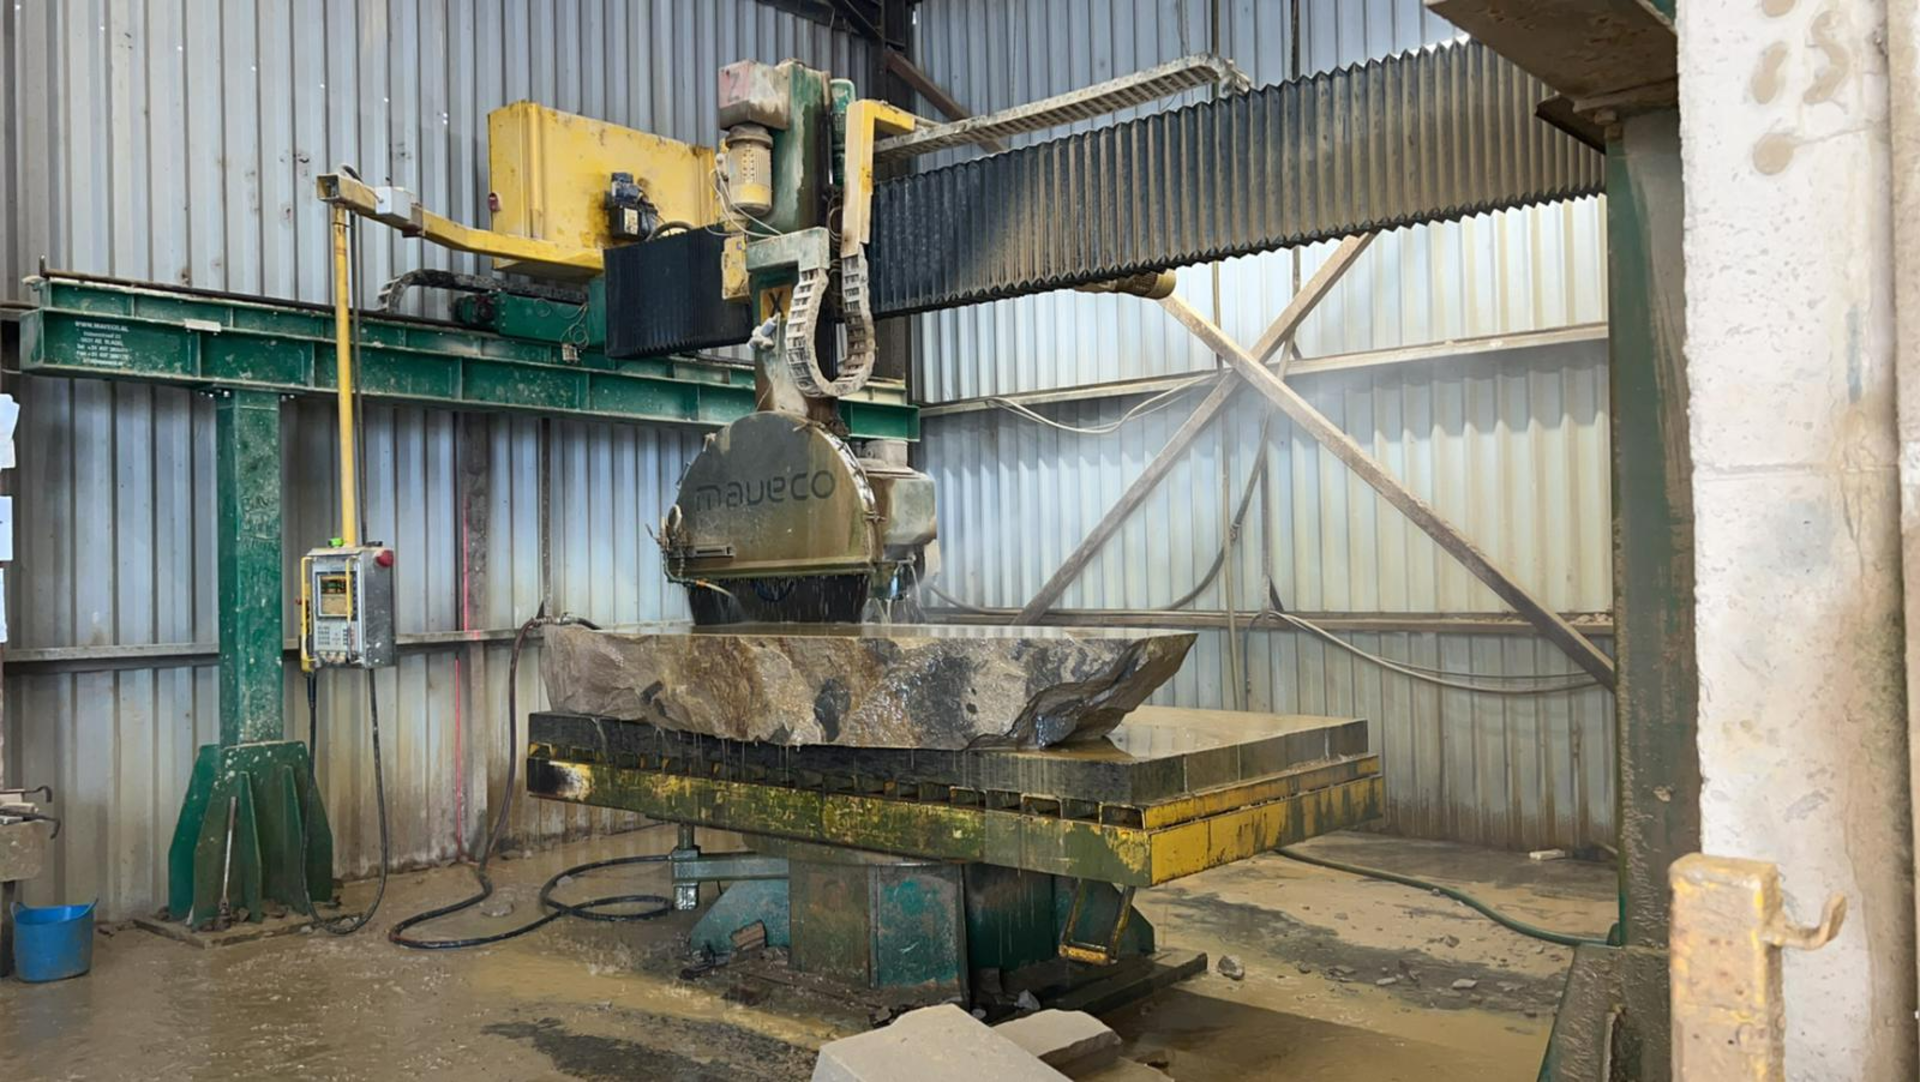 Maveco 1200 automatic Stone Saw Still in use every day Good condition  cuts like new well serviced - Image 2 of 6